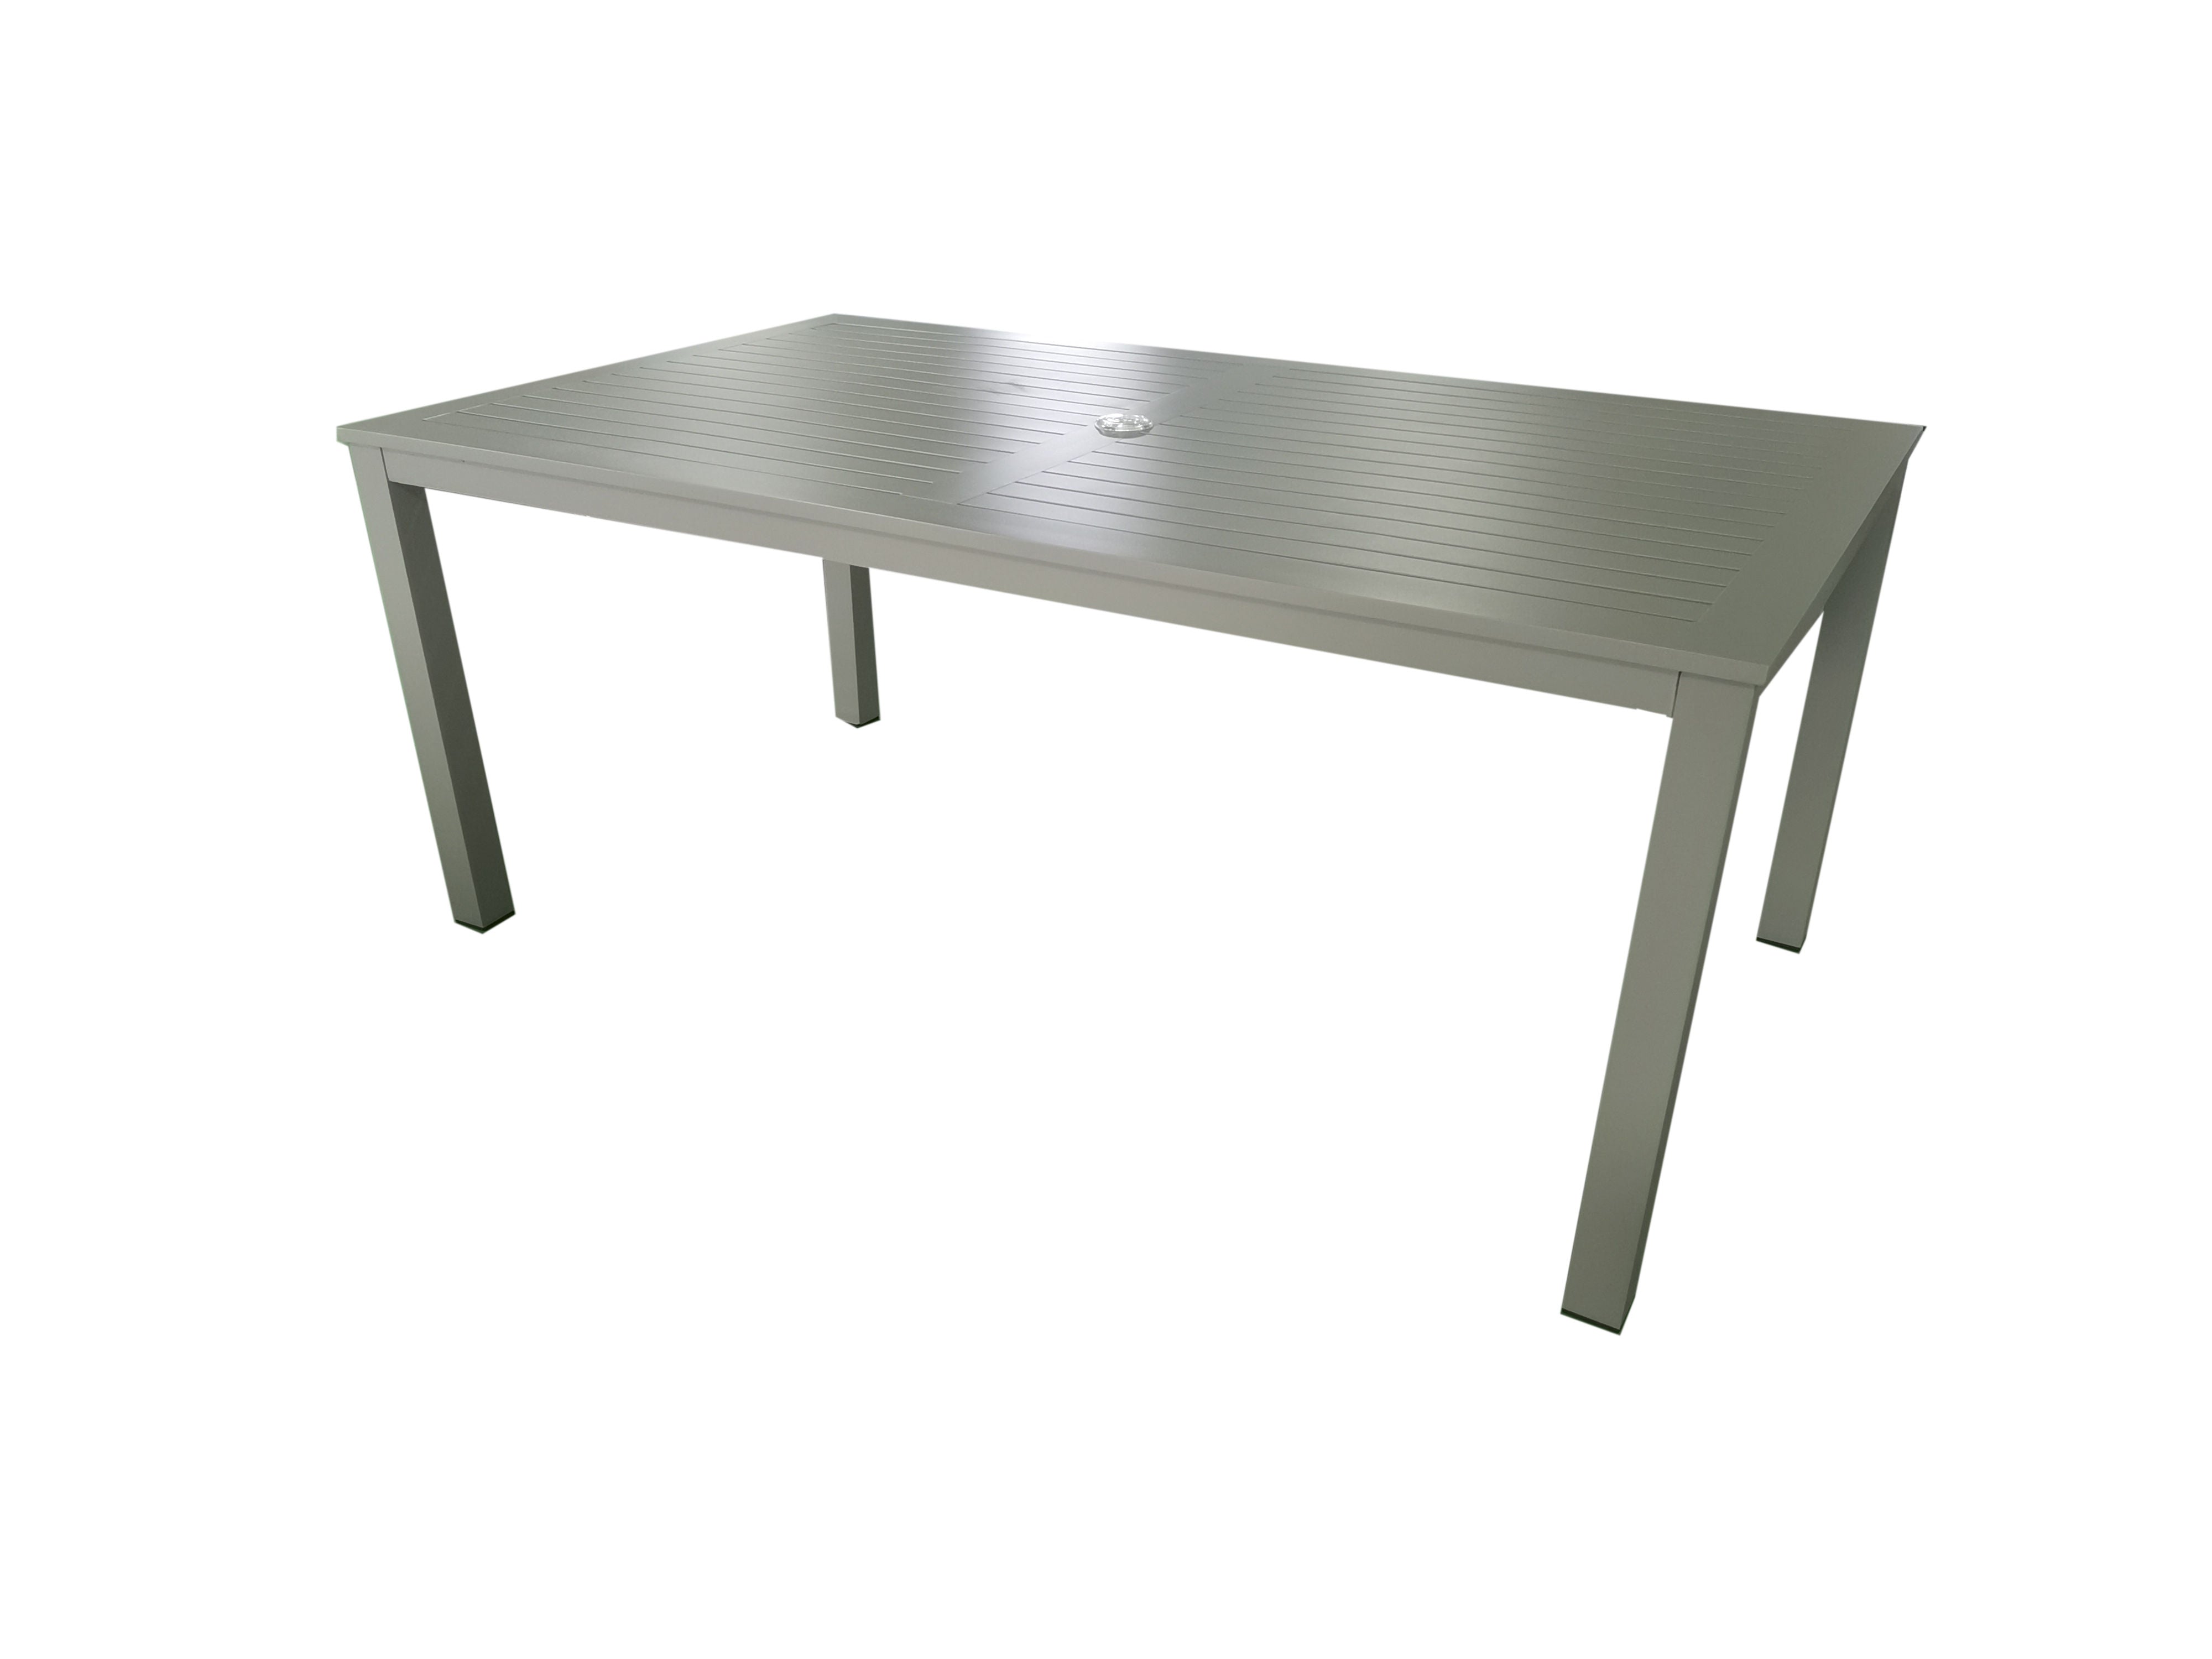 PatioZone Dining Table with Slated Tabletop w/Umbrella Hole in Middle and Aluminum Frame (MOSS-T297TMA) - Matte Taupe